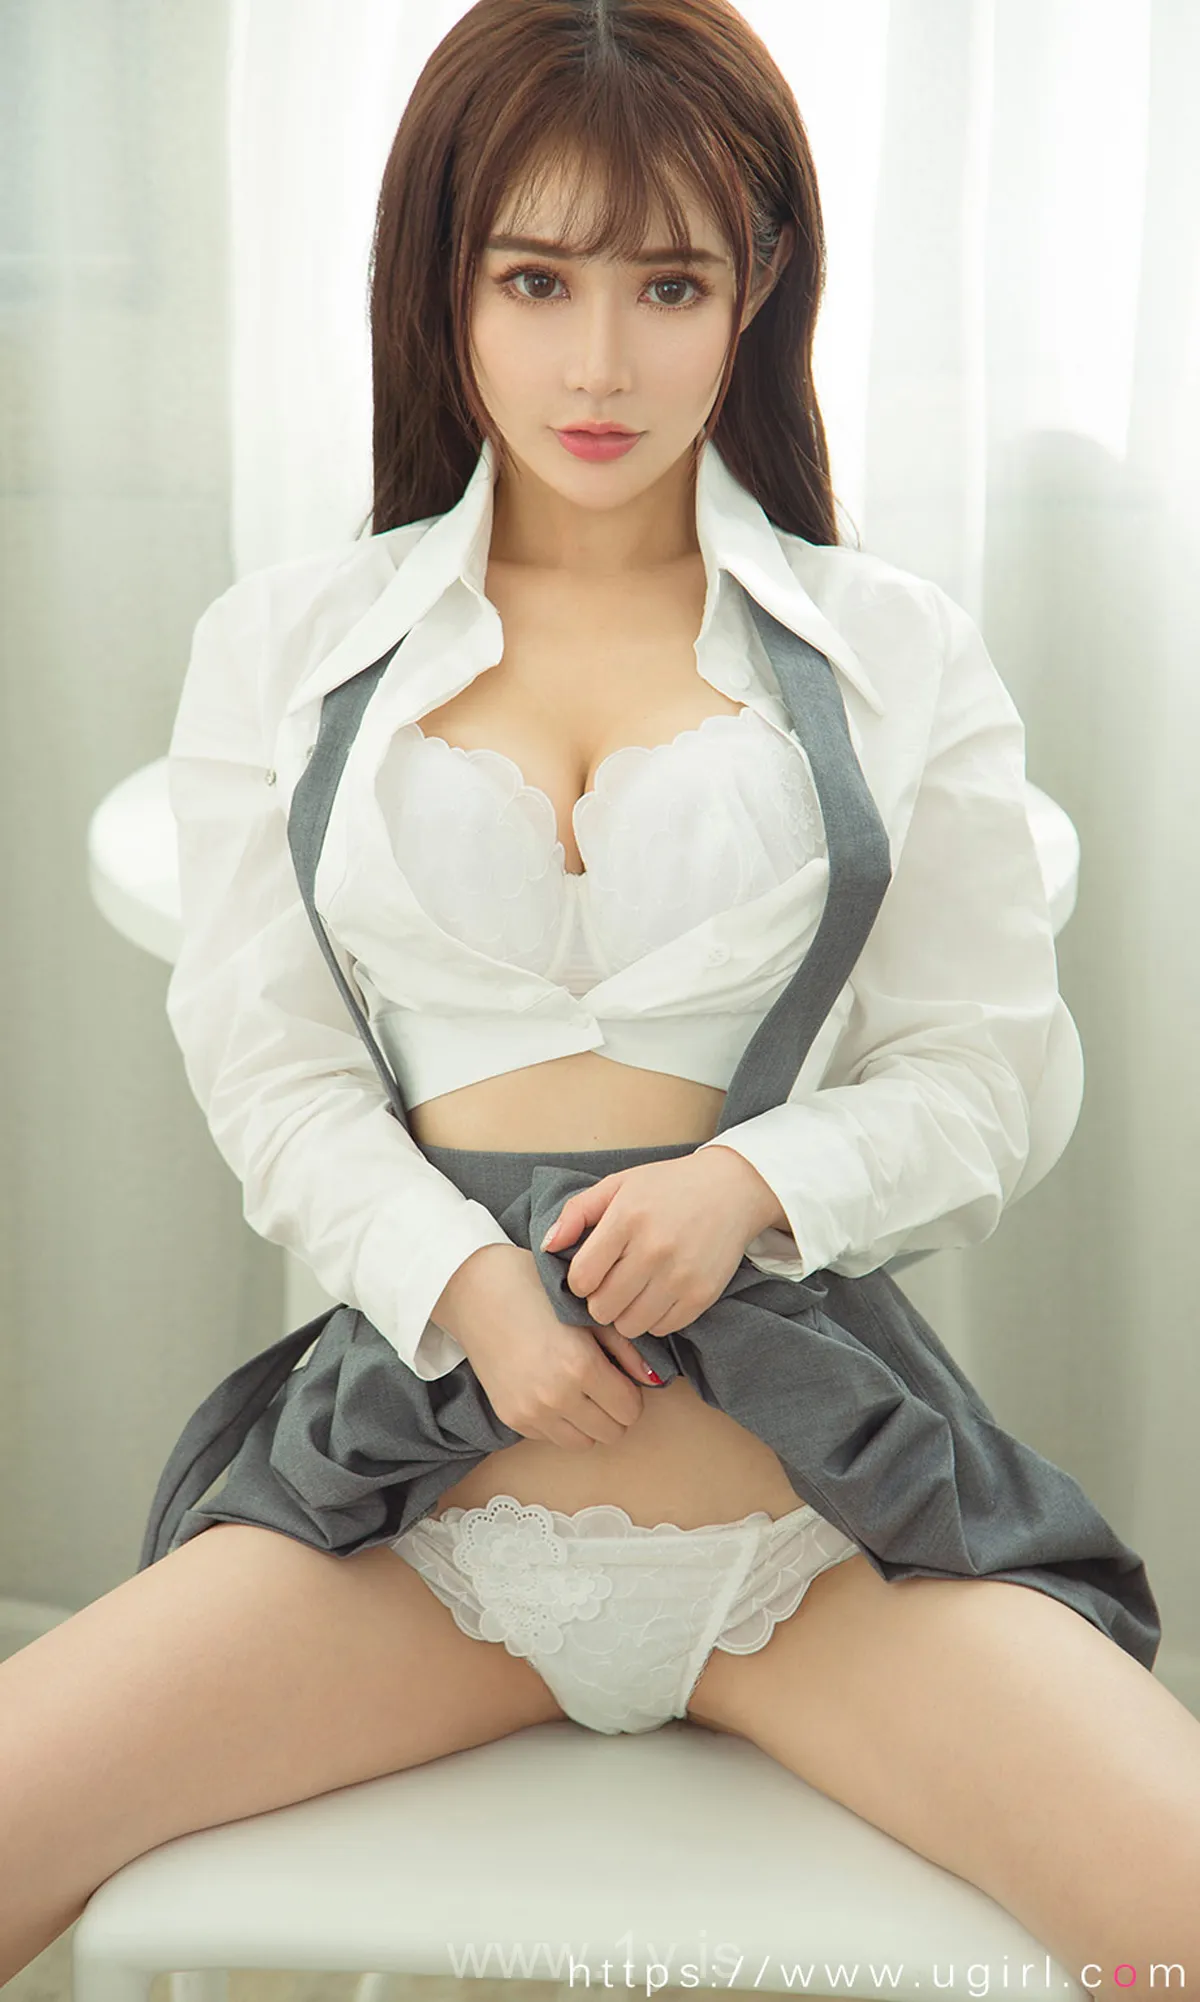 UGIRLS NO.1763 Well Done & Good-looking Chinese Cutie 百见如故